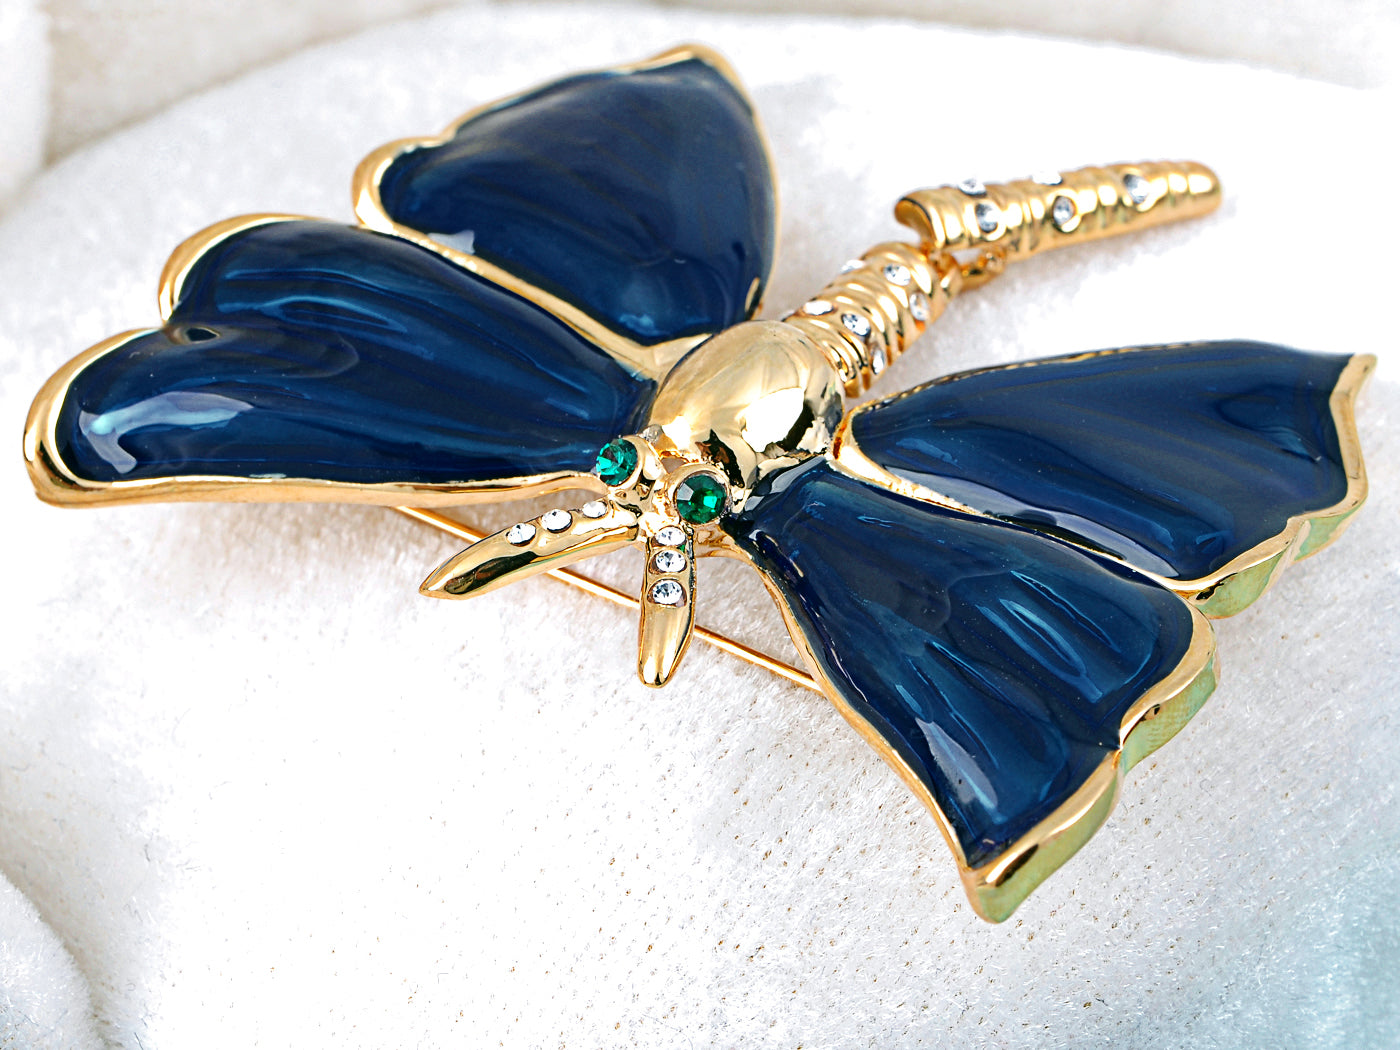 Elements Pearlescent Royal Blue Painted Dragonfly Pin Brooch